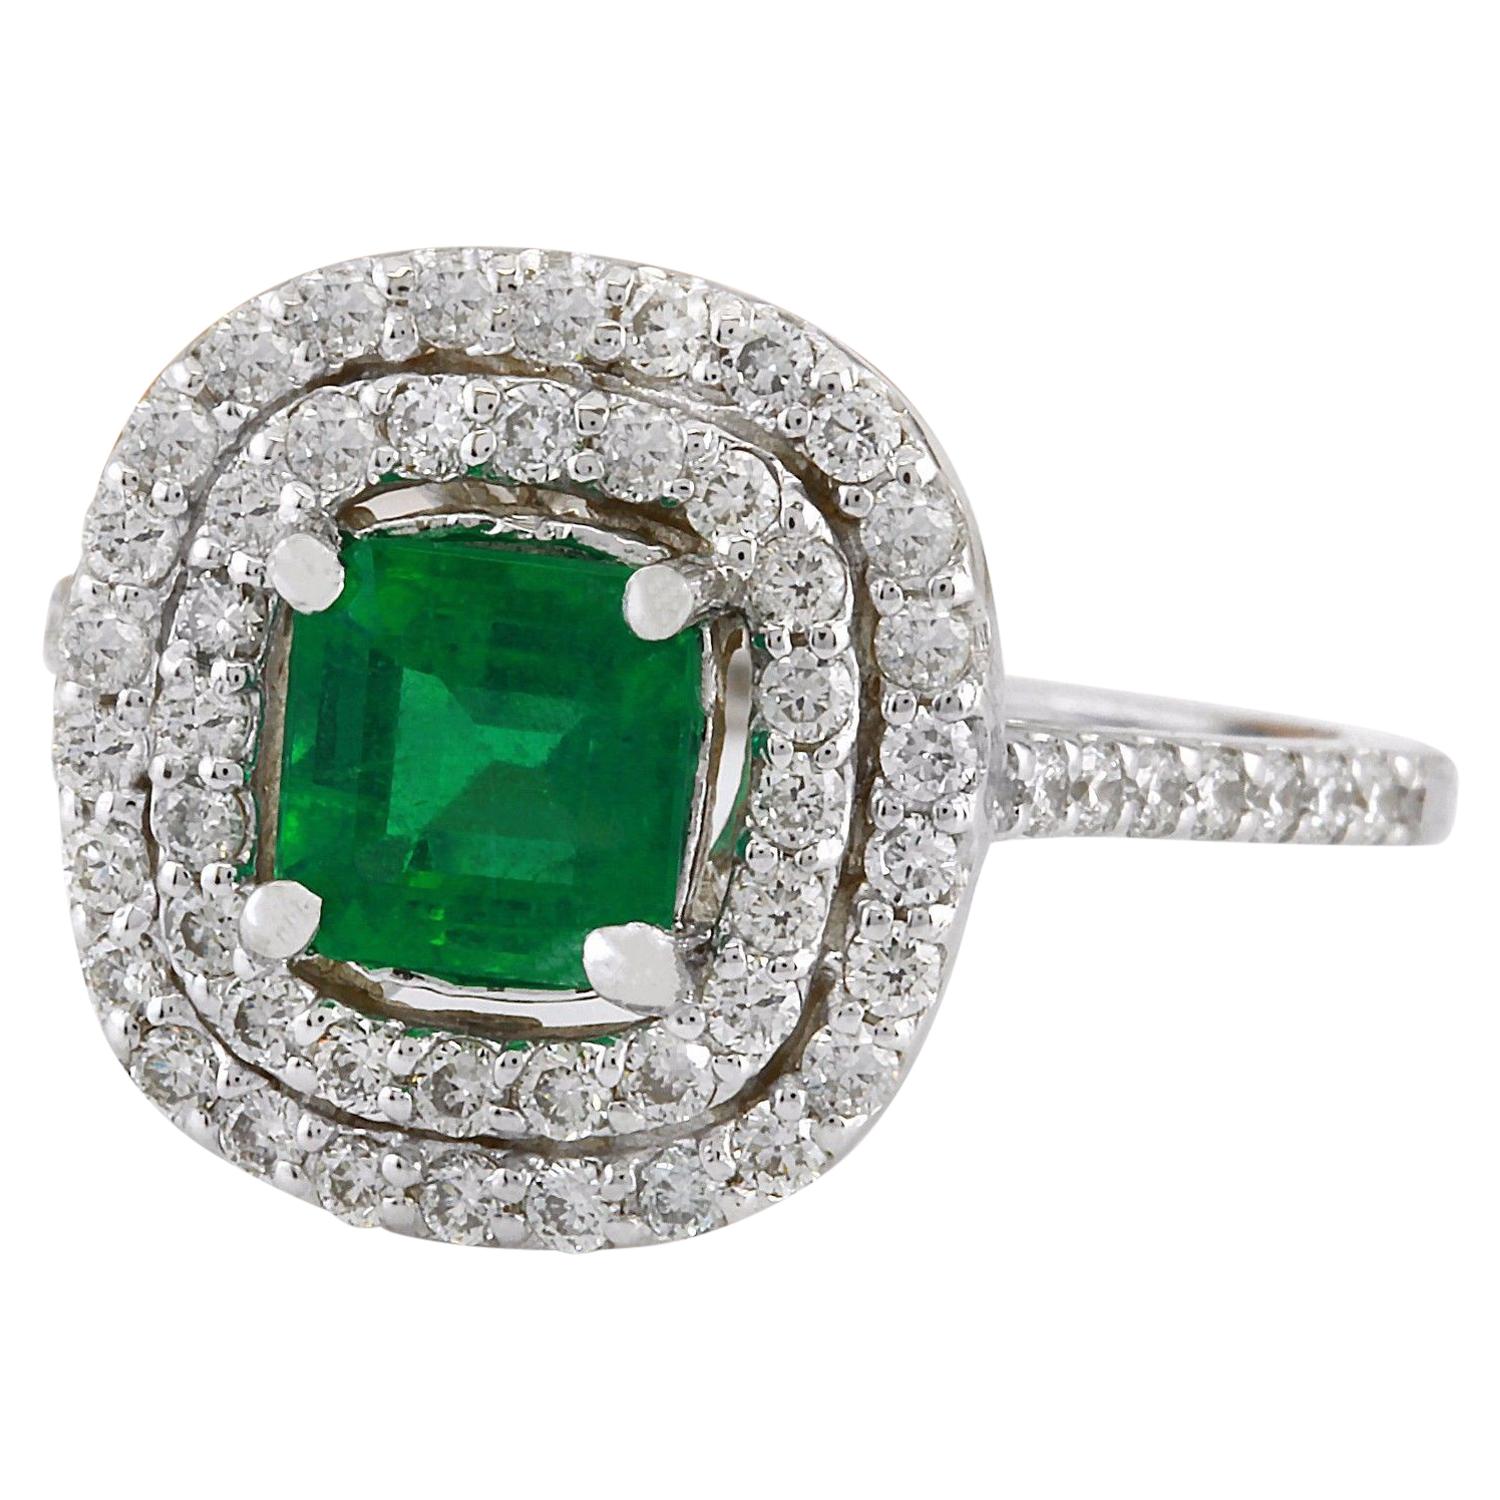 2.10 Carat Natural Emerald 14K Solid White Gold Diamond Ring
 Item Type: Ring
 Item Style: Engagement
 Material: 14K White Gold
 Mainstone: Emerald
 Stone Color: Green
 Stone Weight: 1.85 Carat
 Stone Shape: Emerald
 Stone Quantity: 1
 Stone